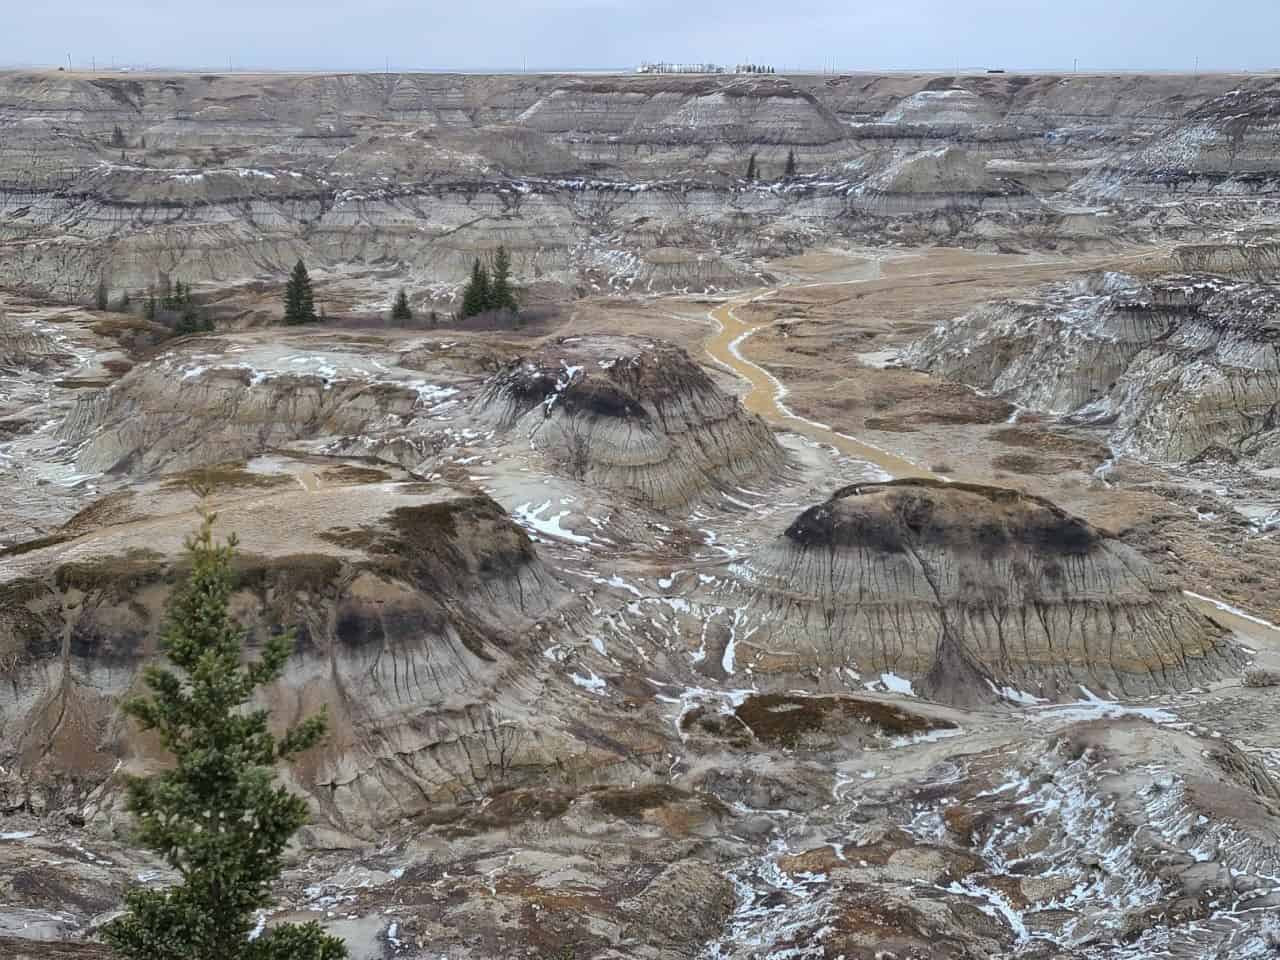 A lightly snowy view of Horseshoe Canyon in Drumheller Alberta Canada